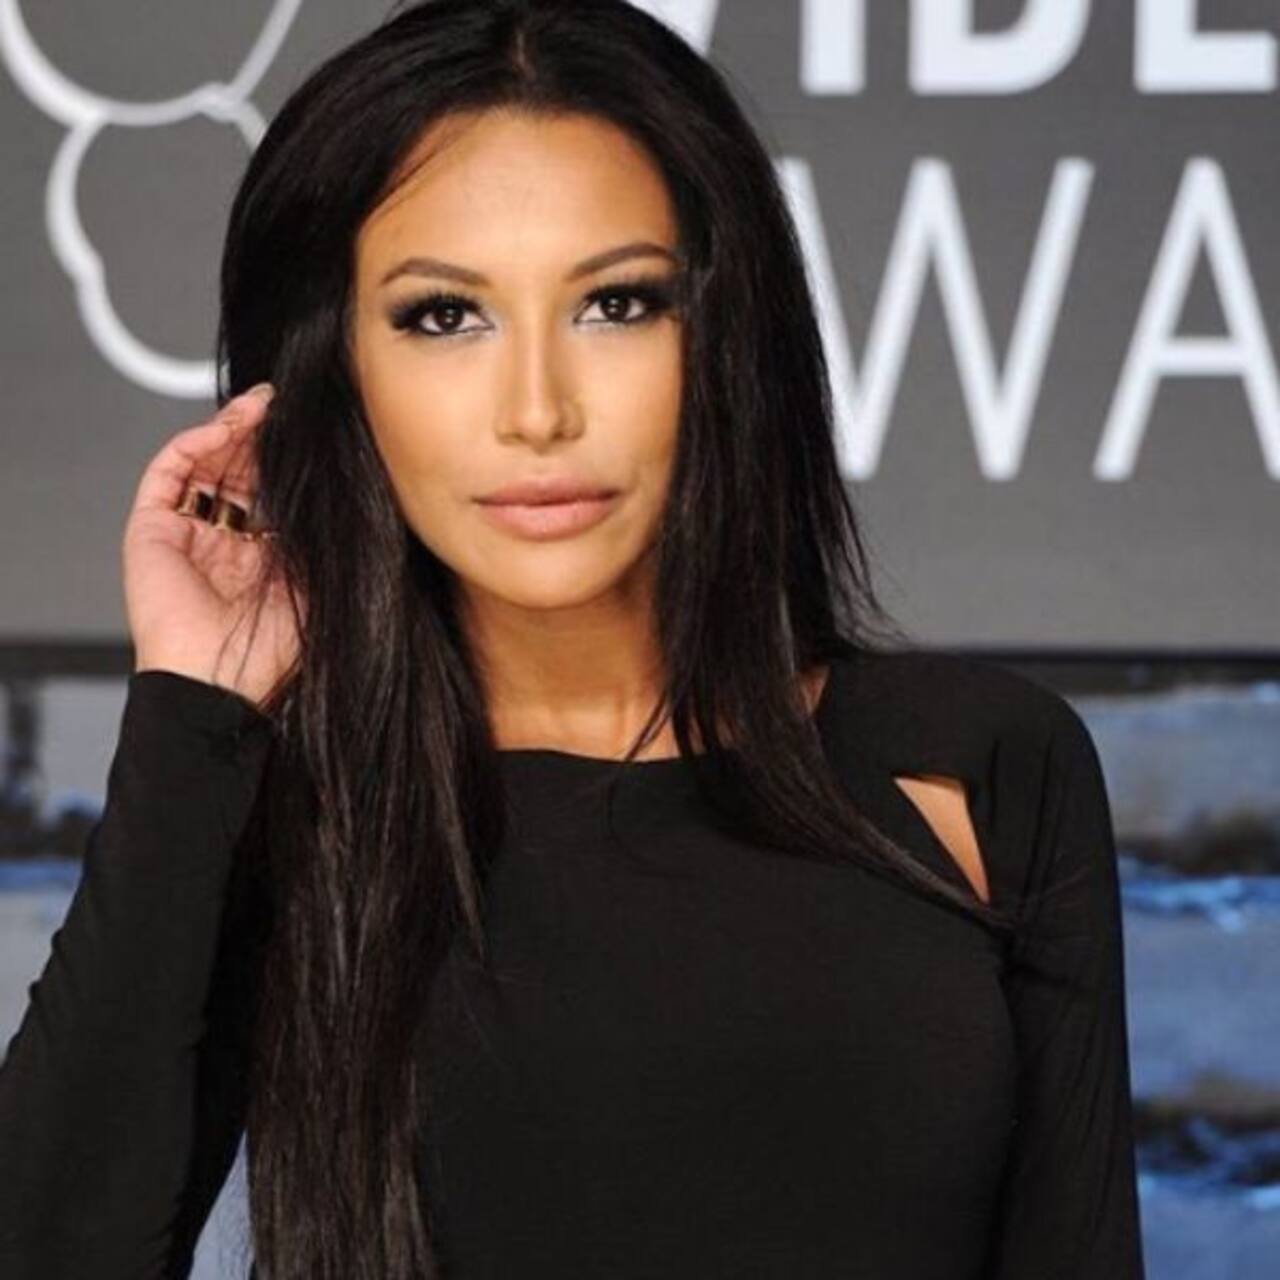 Glee star Naya Rivera MISSING after a swimming accident in California